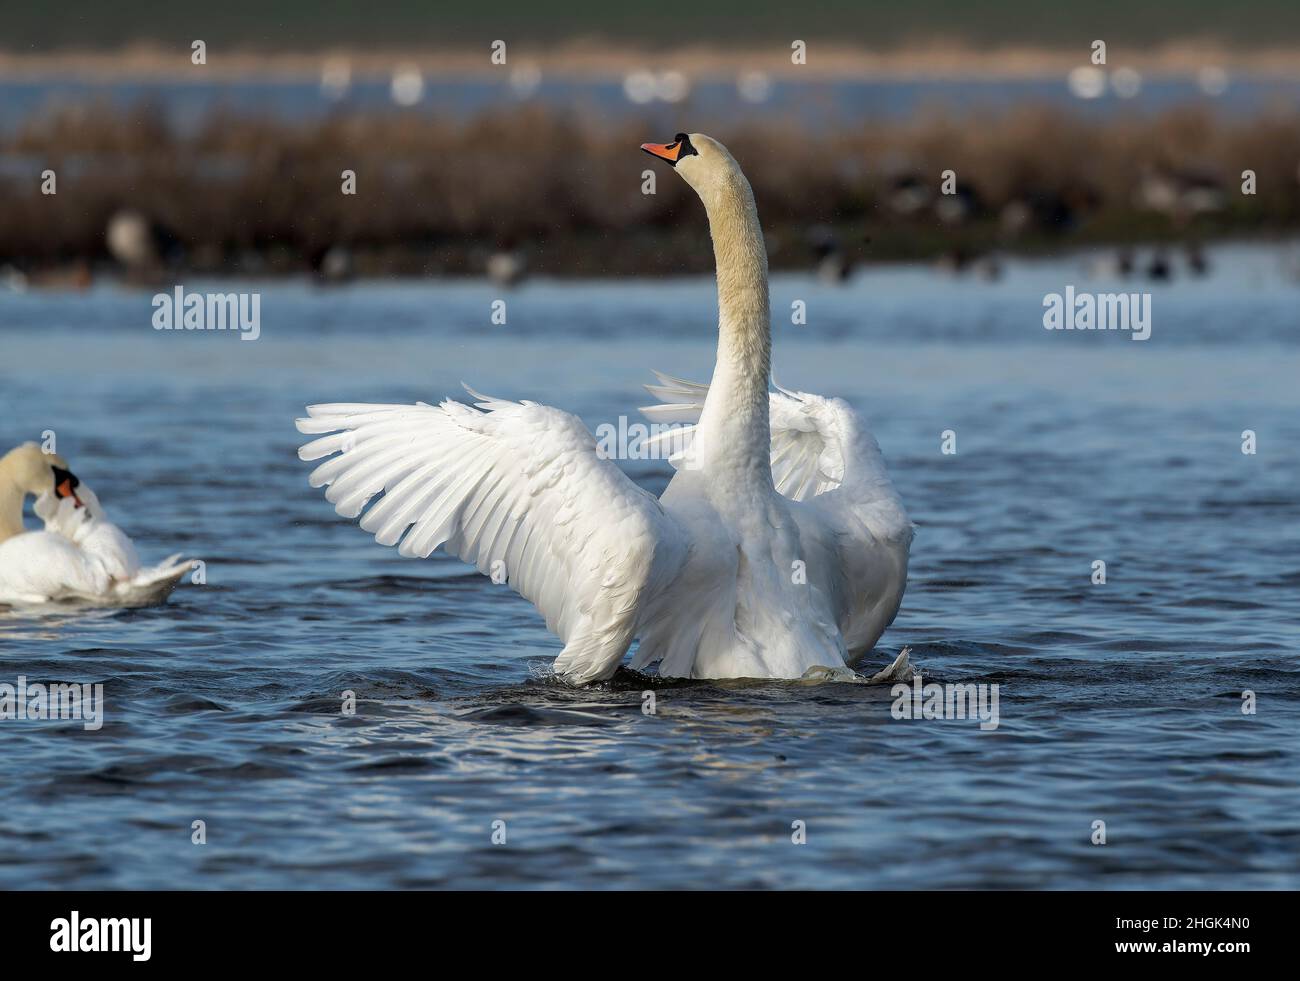 Mute swan with wings outstretched Stock Photo